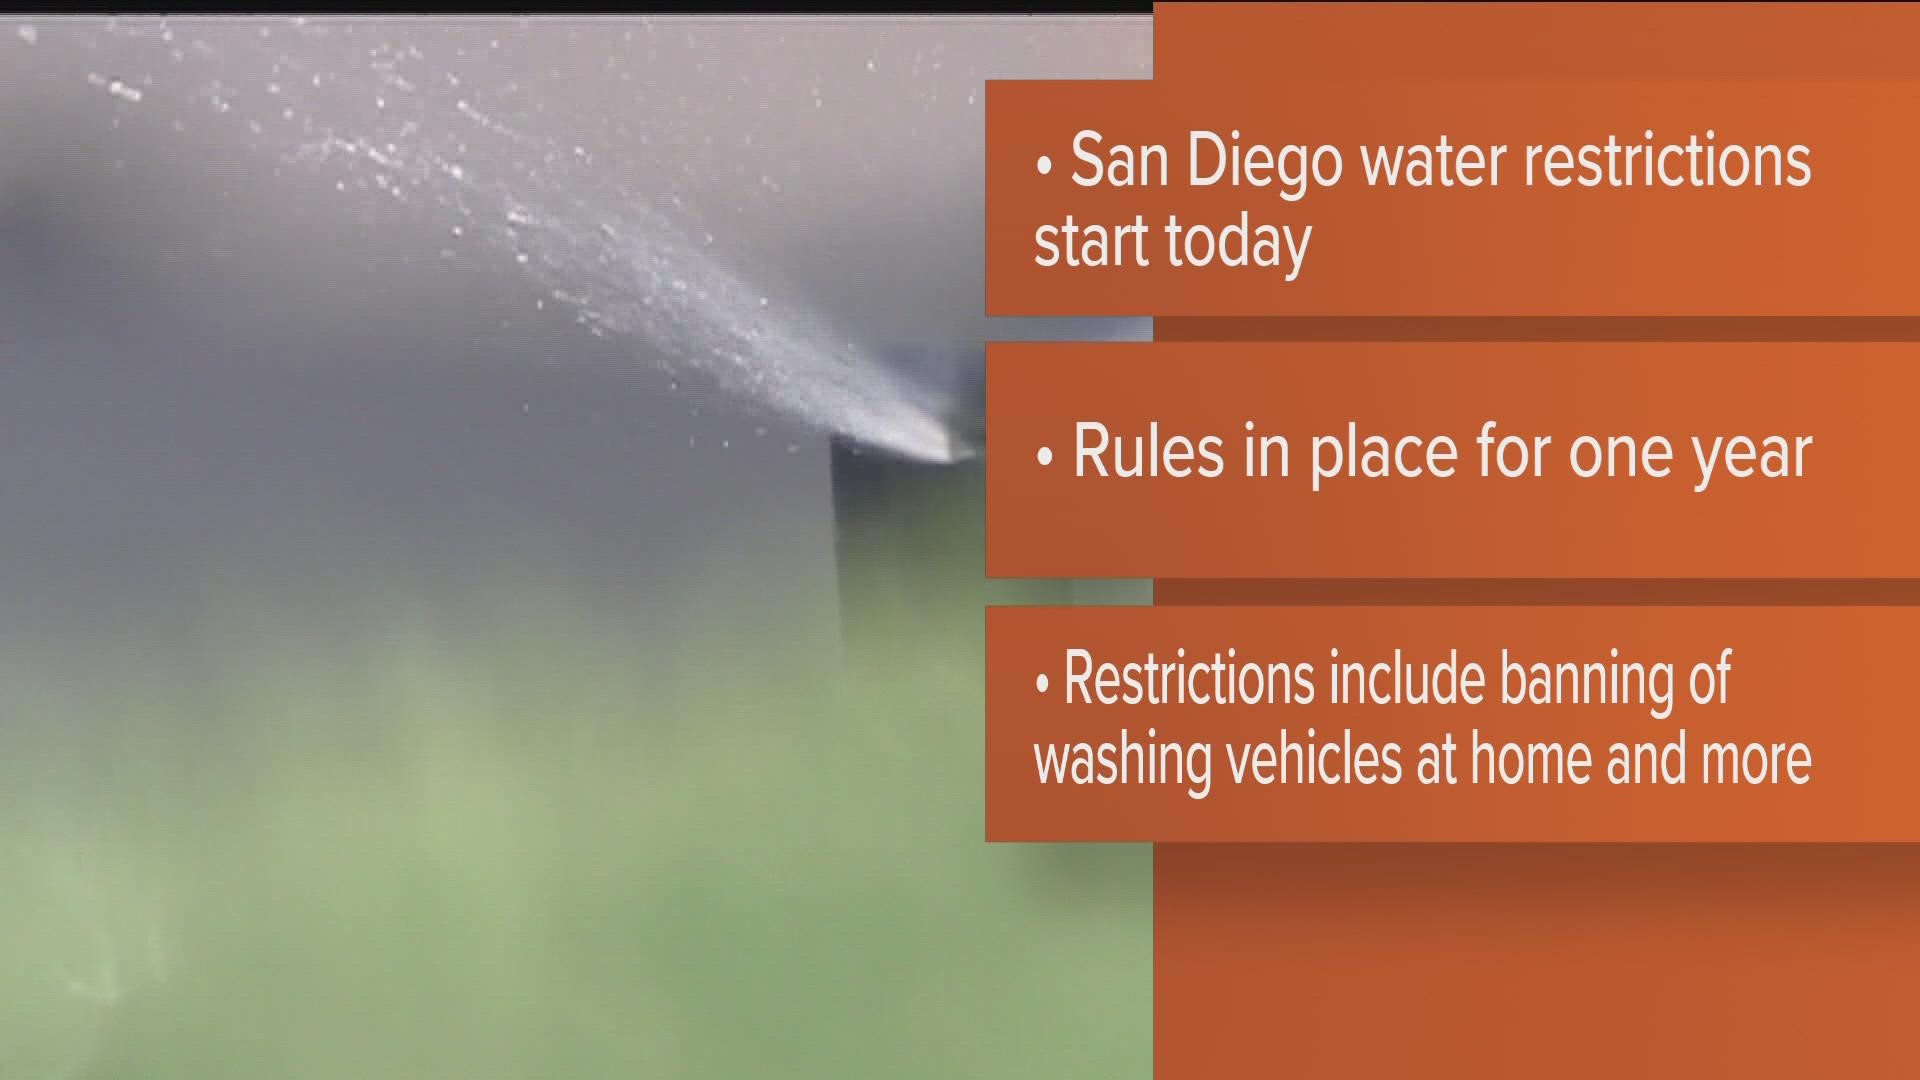 Residents and businesses are urged to limit water use by limiting irrigation and stop washing cars at home.